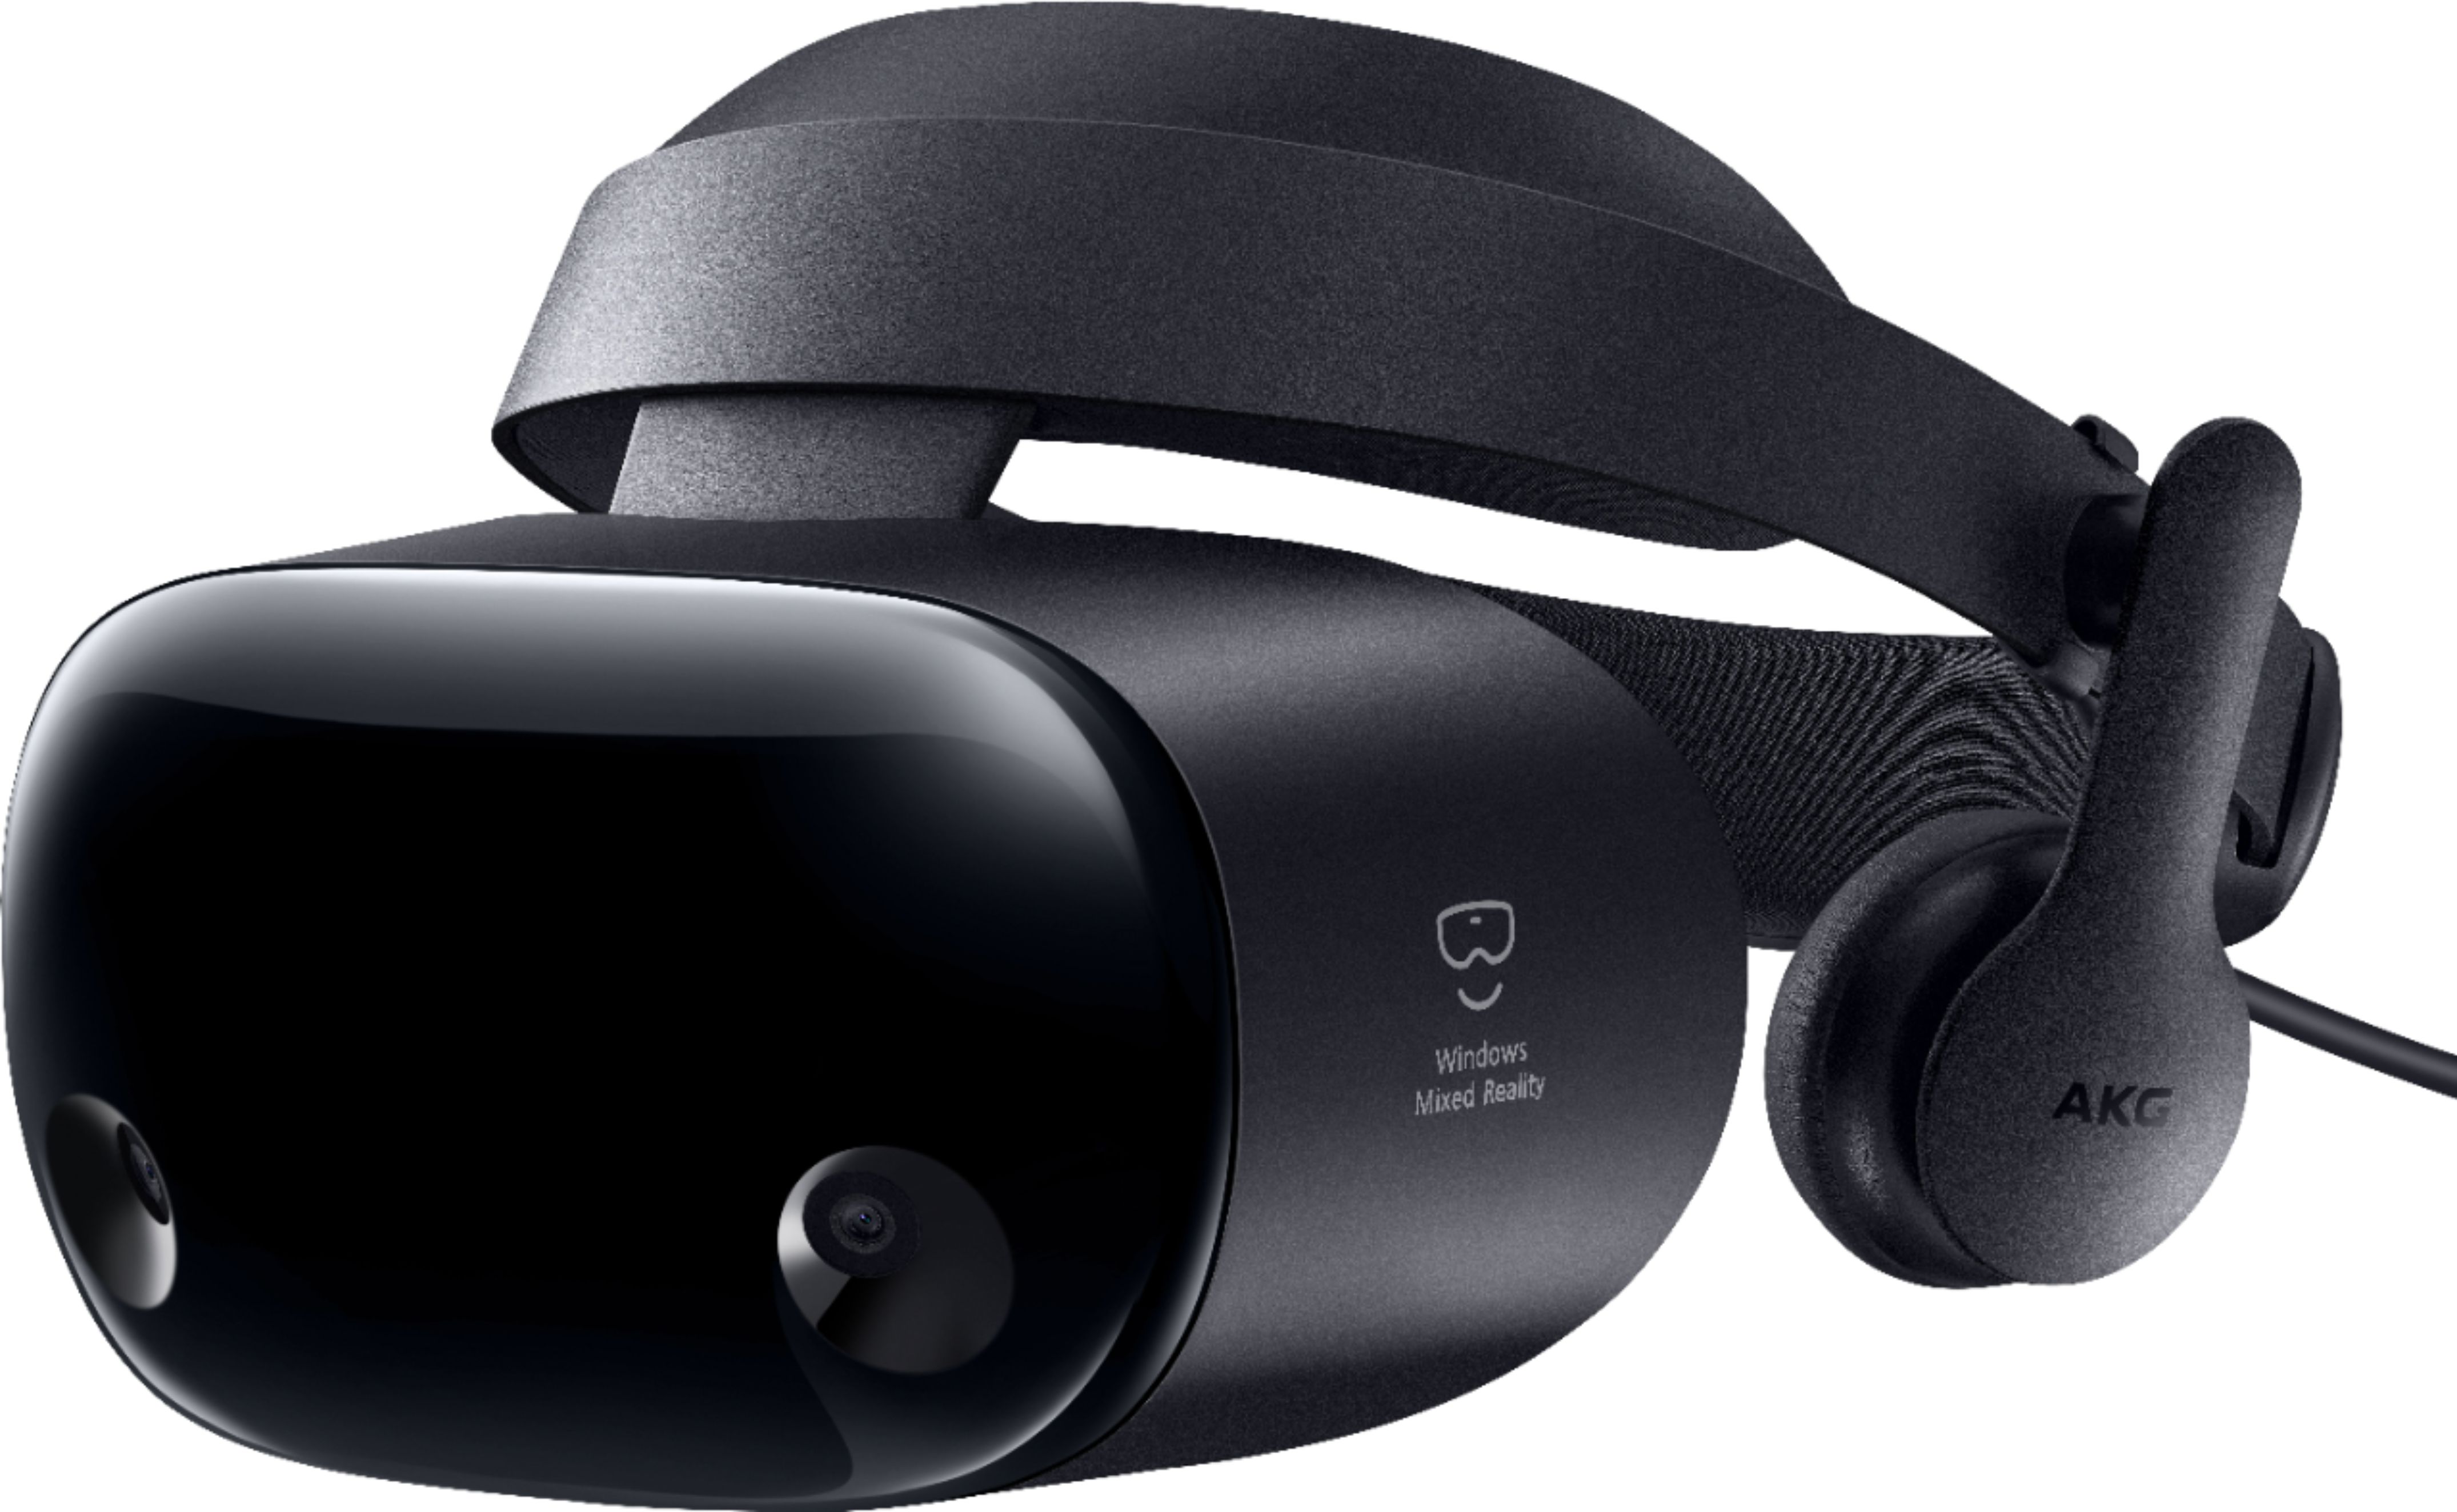 Samsung Hmd Odyssey Virtual Reality Headset For Compatible Windows Pcs